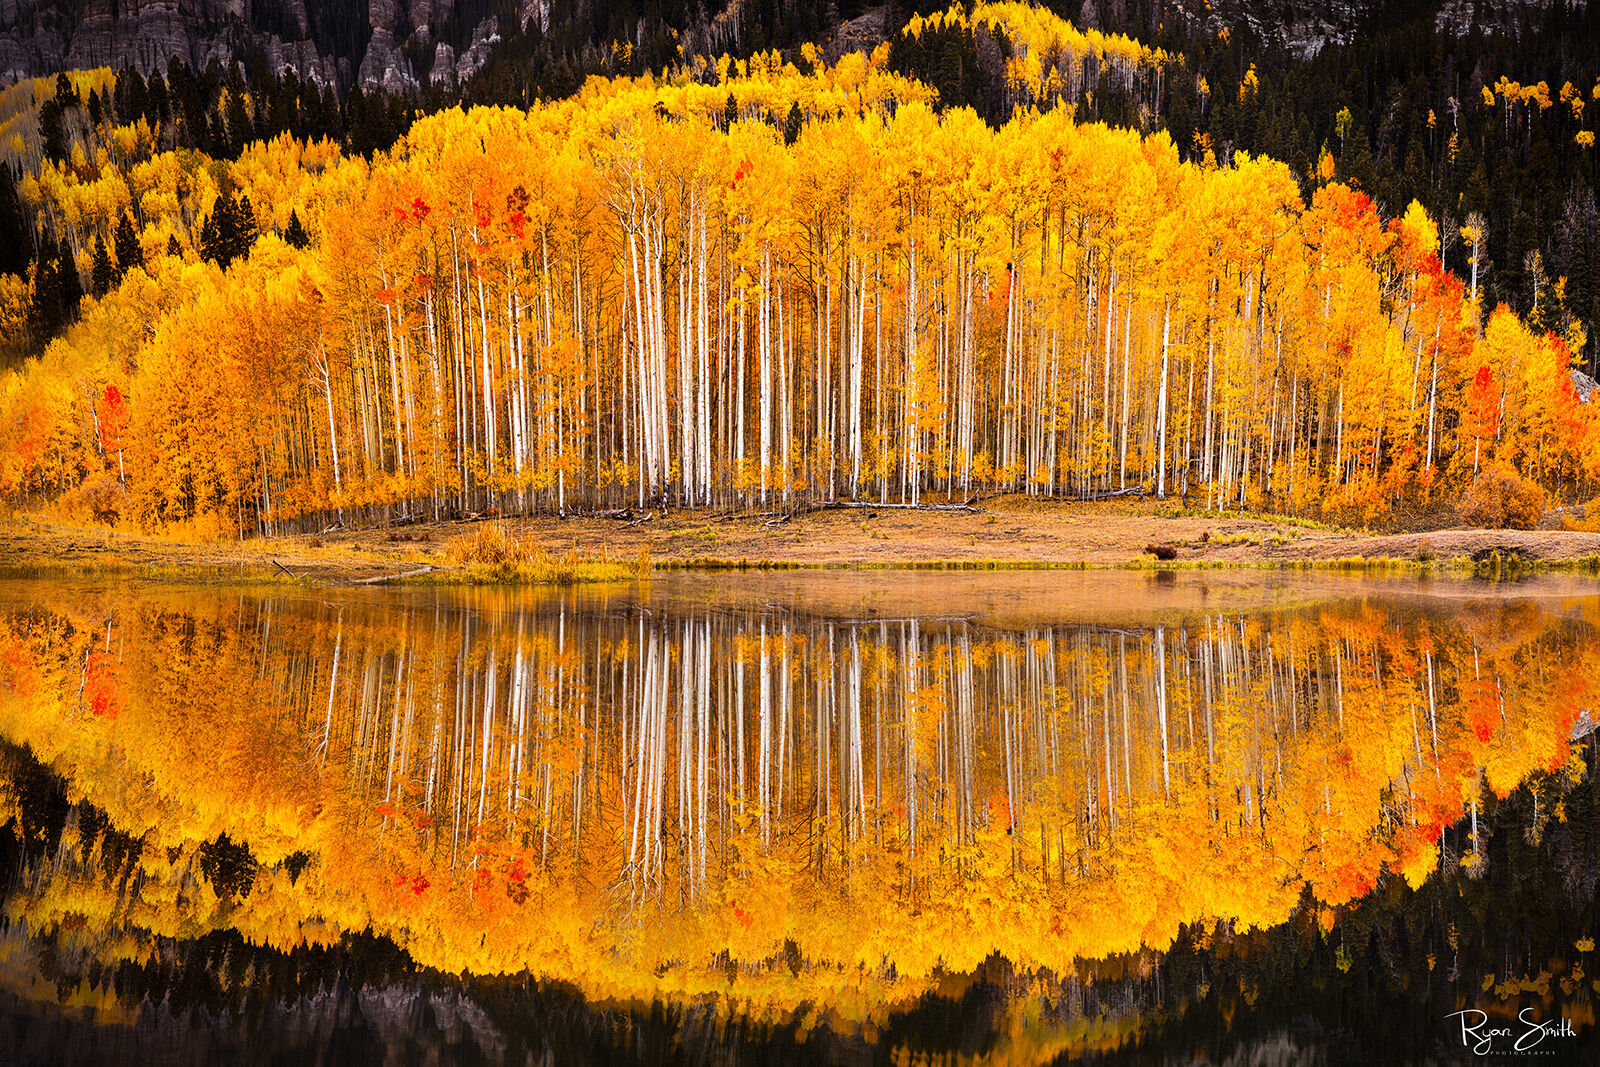 Bright yellow aspen grove on a hill reflecting on the water with the tallest white trunks in the middle and tapering to the sides shapes the scene like an eye.